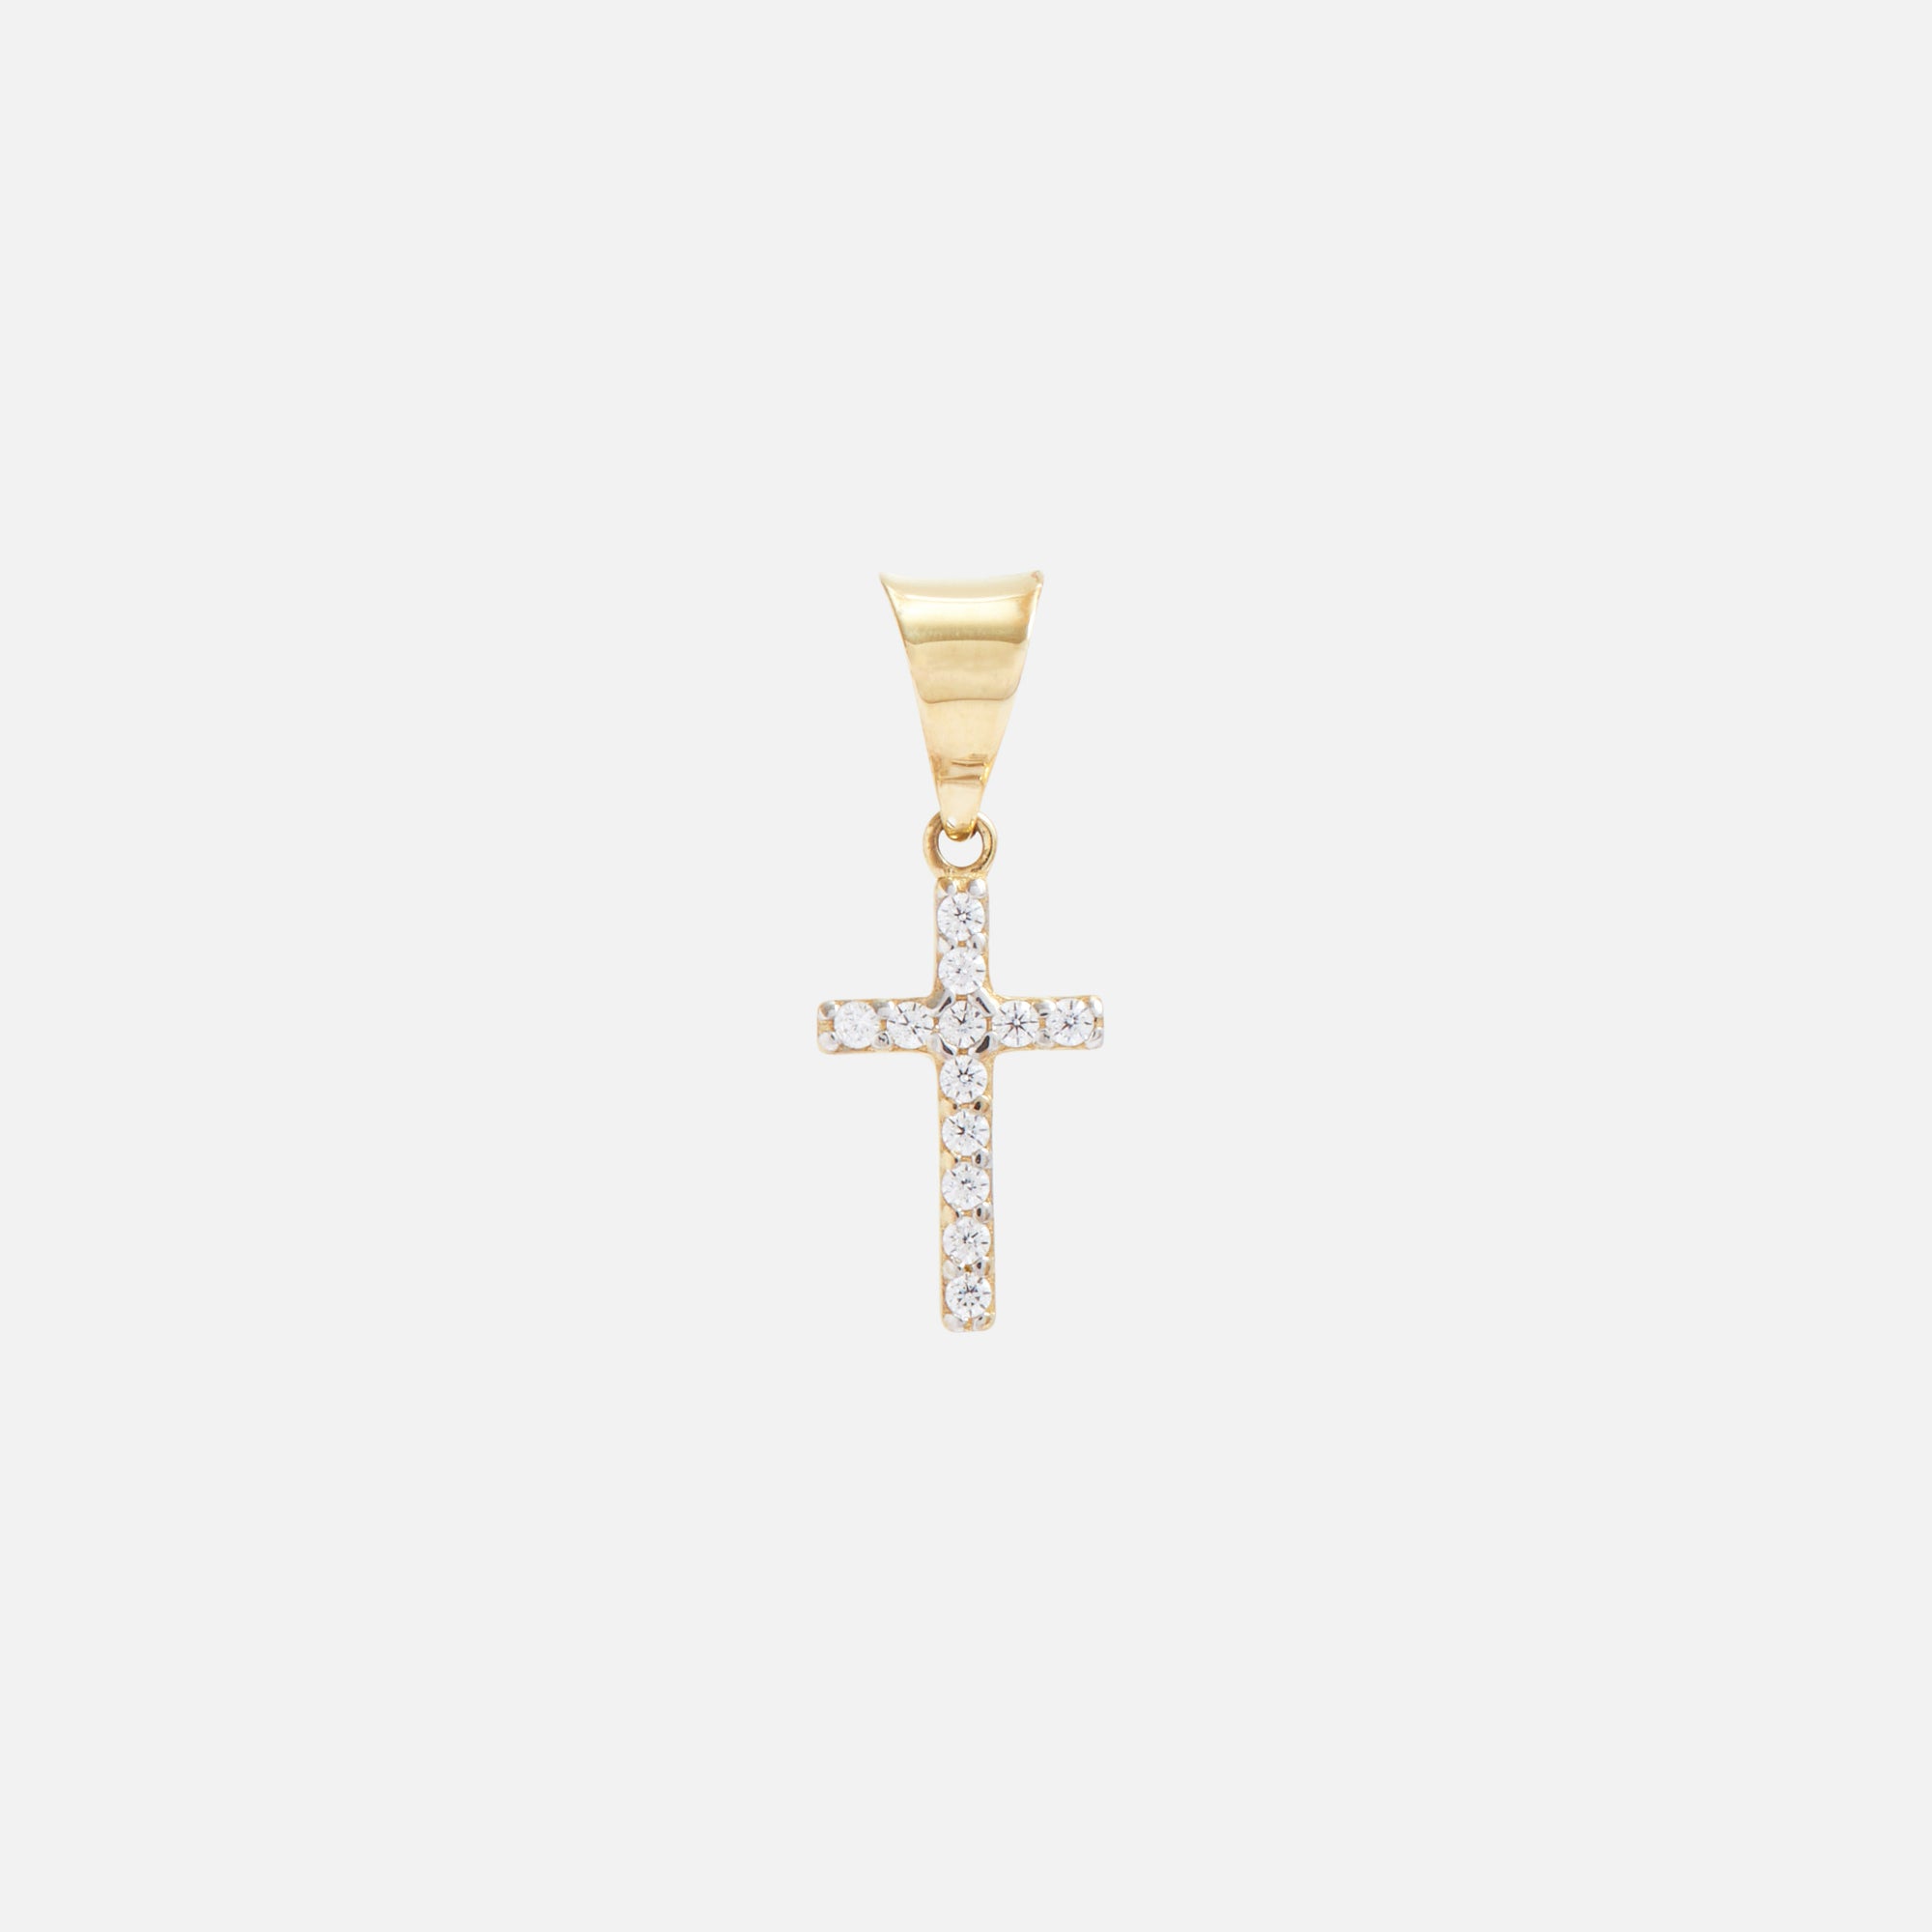 10k yellow gold cross with stones charm